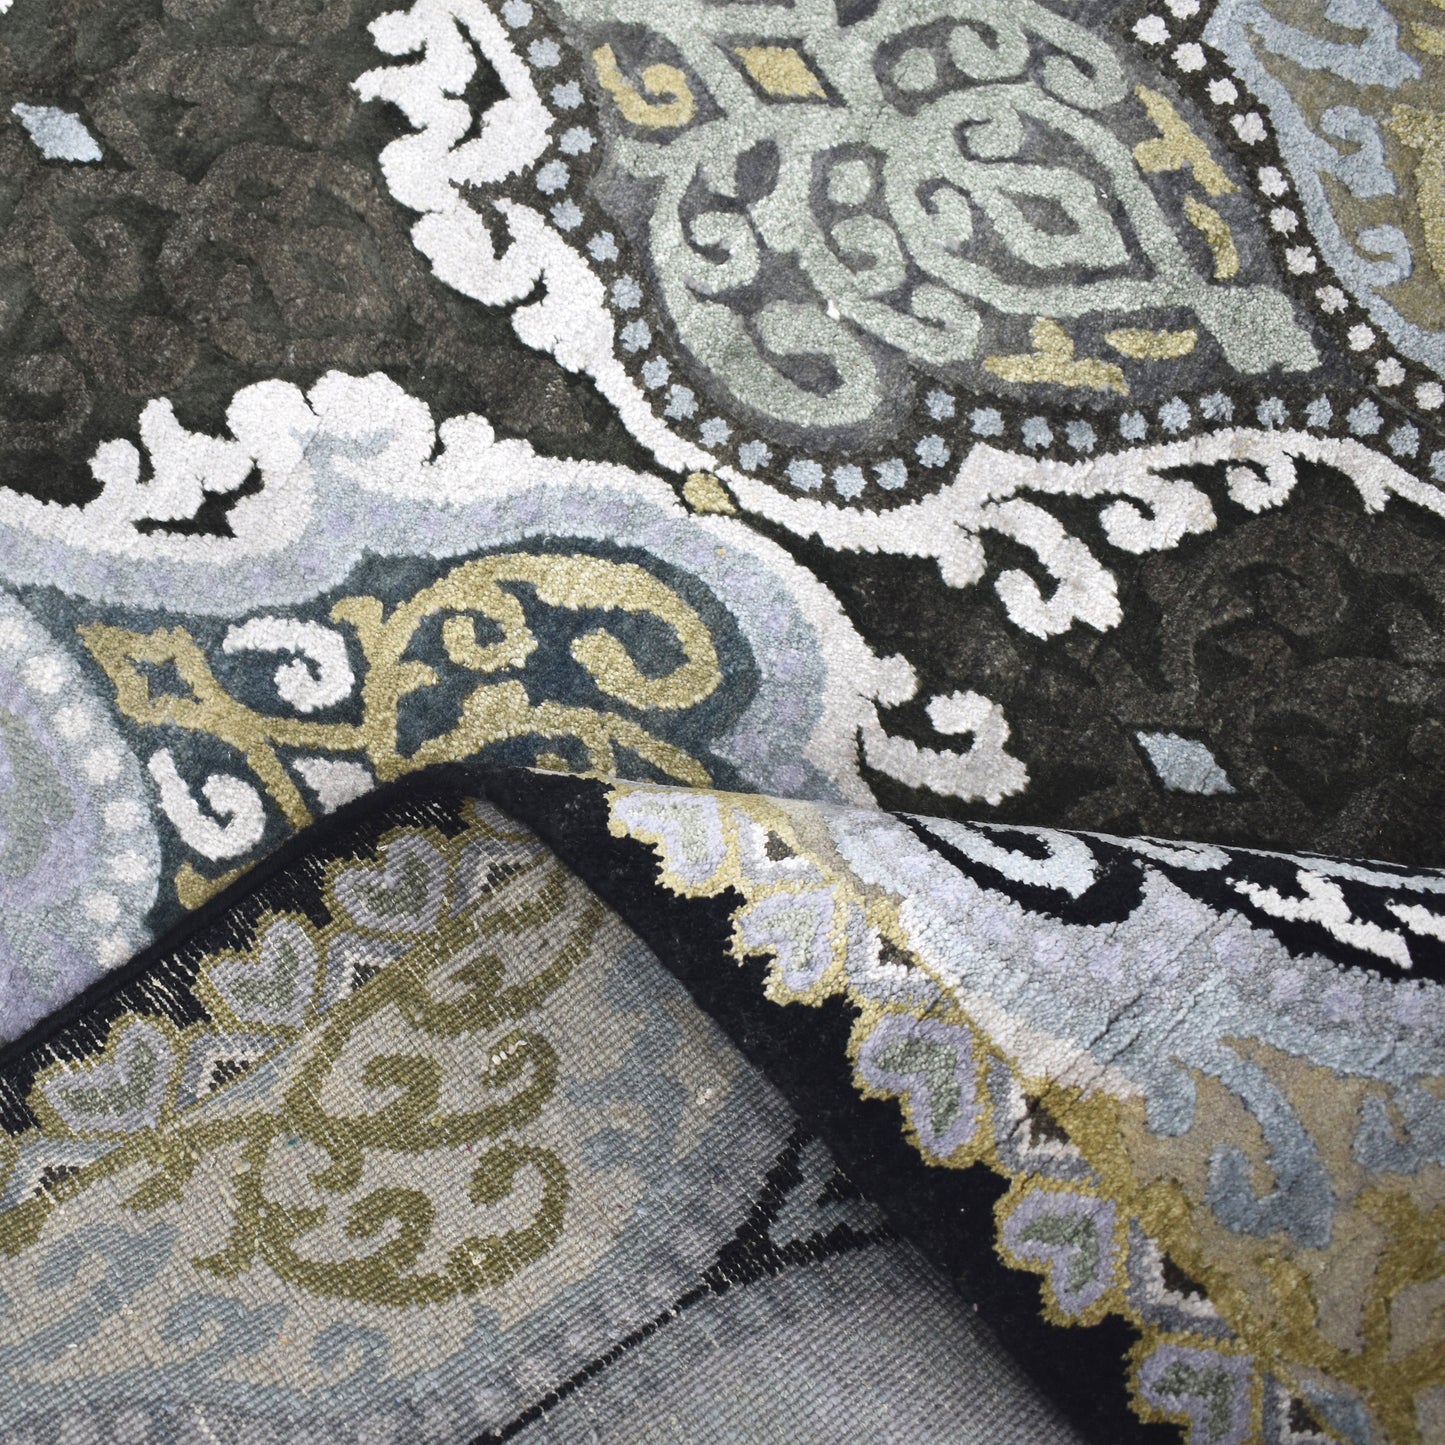 Get trendy with Wazir Damask Blue, Black and Multy Silk and Wool Transitional Handknotted Area Rug - Transitional Rugs available at Jaipur Oriental Rugs. Grab yours for $5860.00 today!